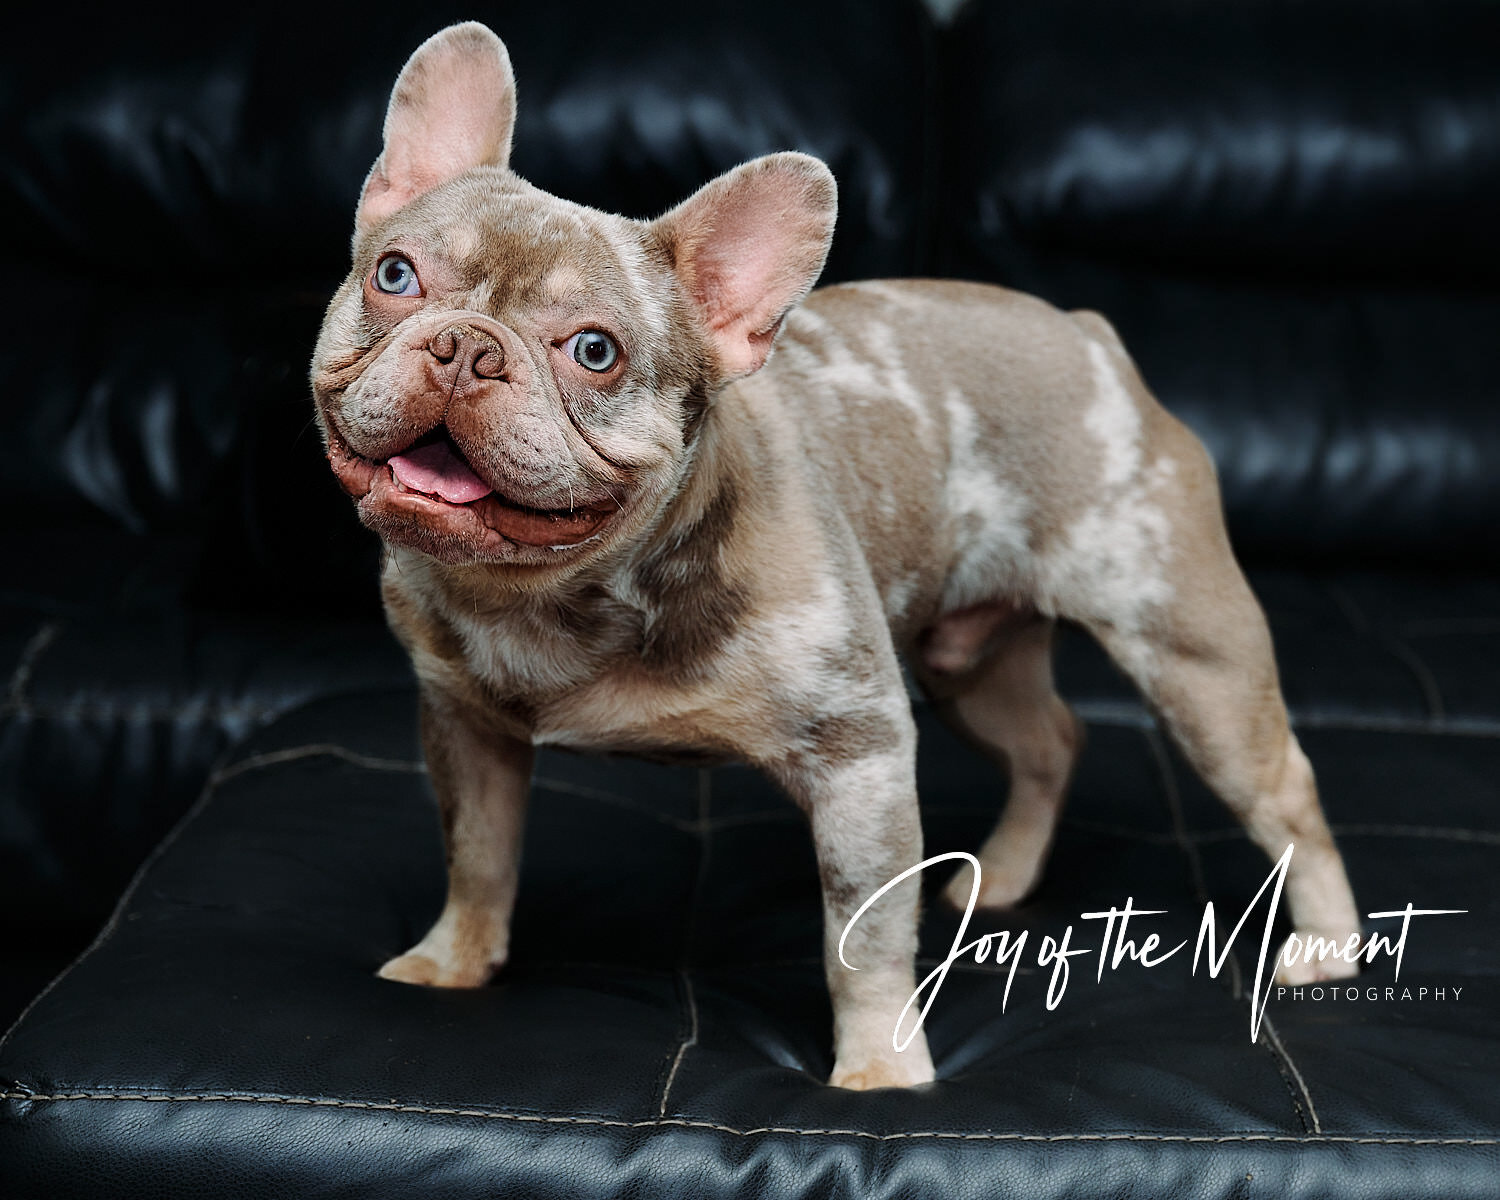  Portraits of Aces Wild, a French bulldog. What a sweet cutie to spend an hour with, so friendly and kind! His breeder Alonna Fisher wanted images of this purebred stud for her kennels website 